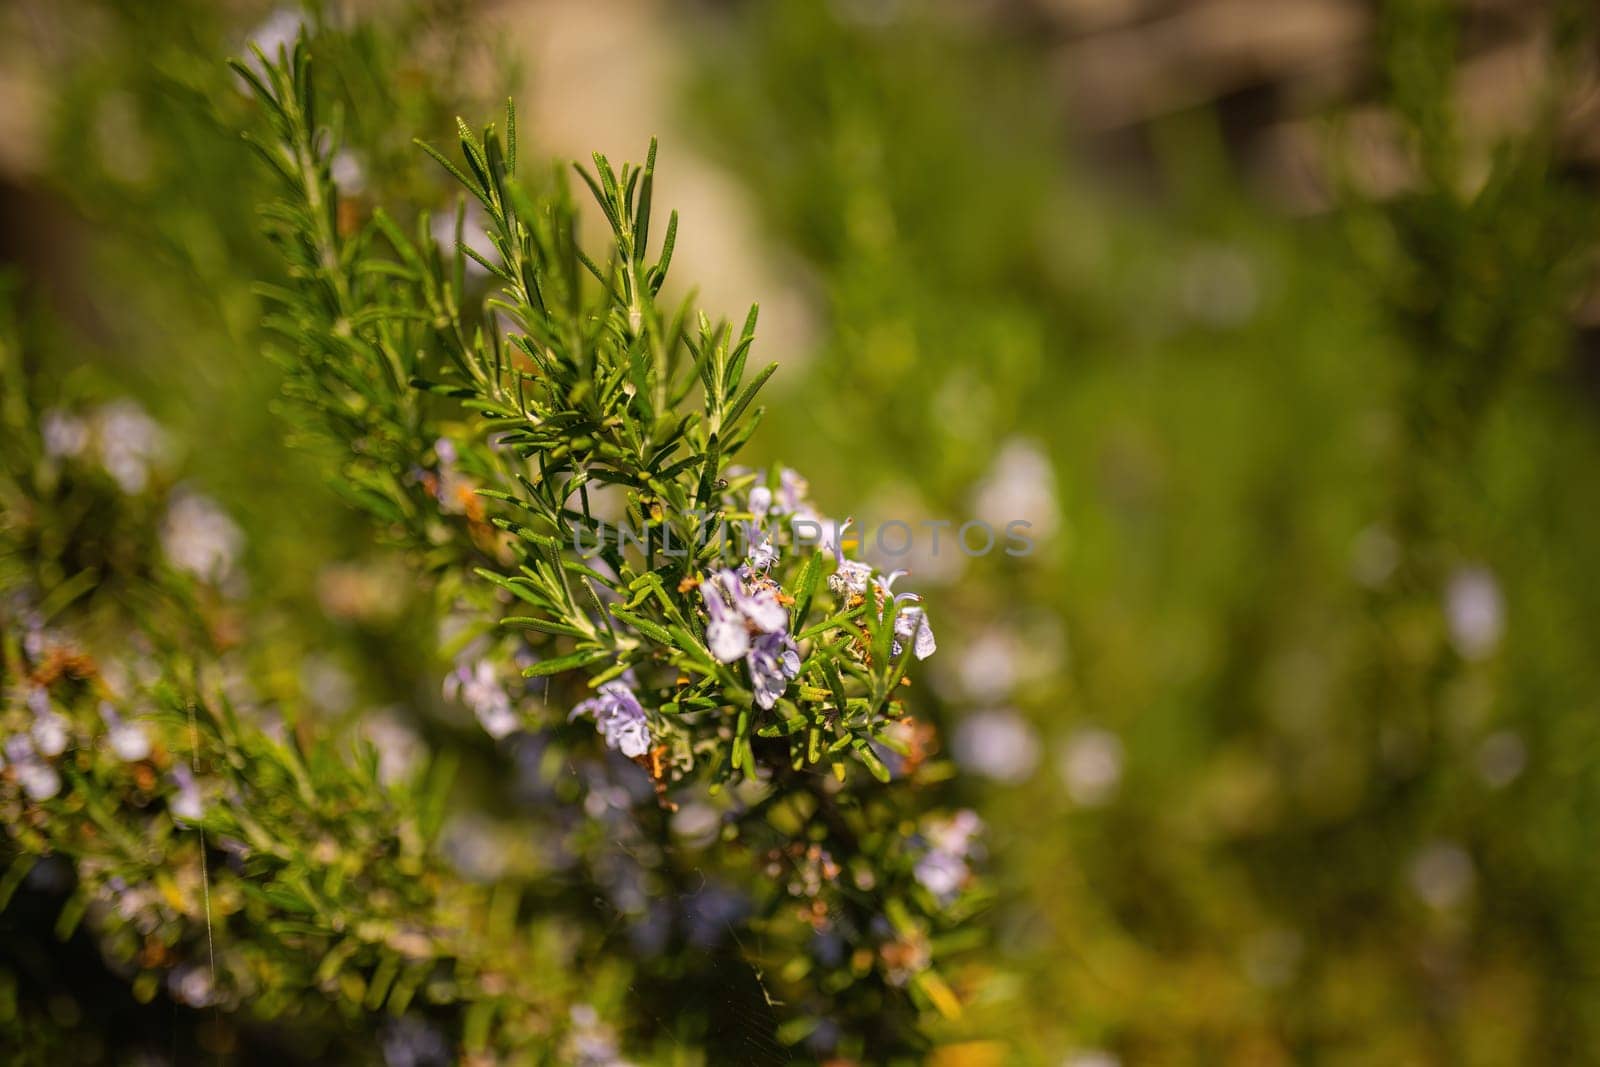 A detailed close-up of a rosemary plant, featuring small blue flowers amidst fragrant green leaves.